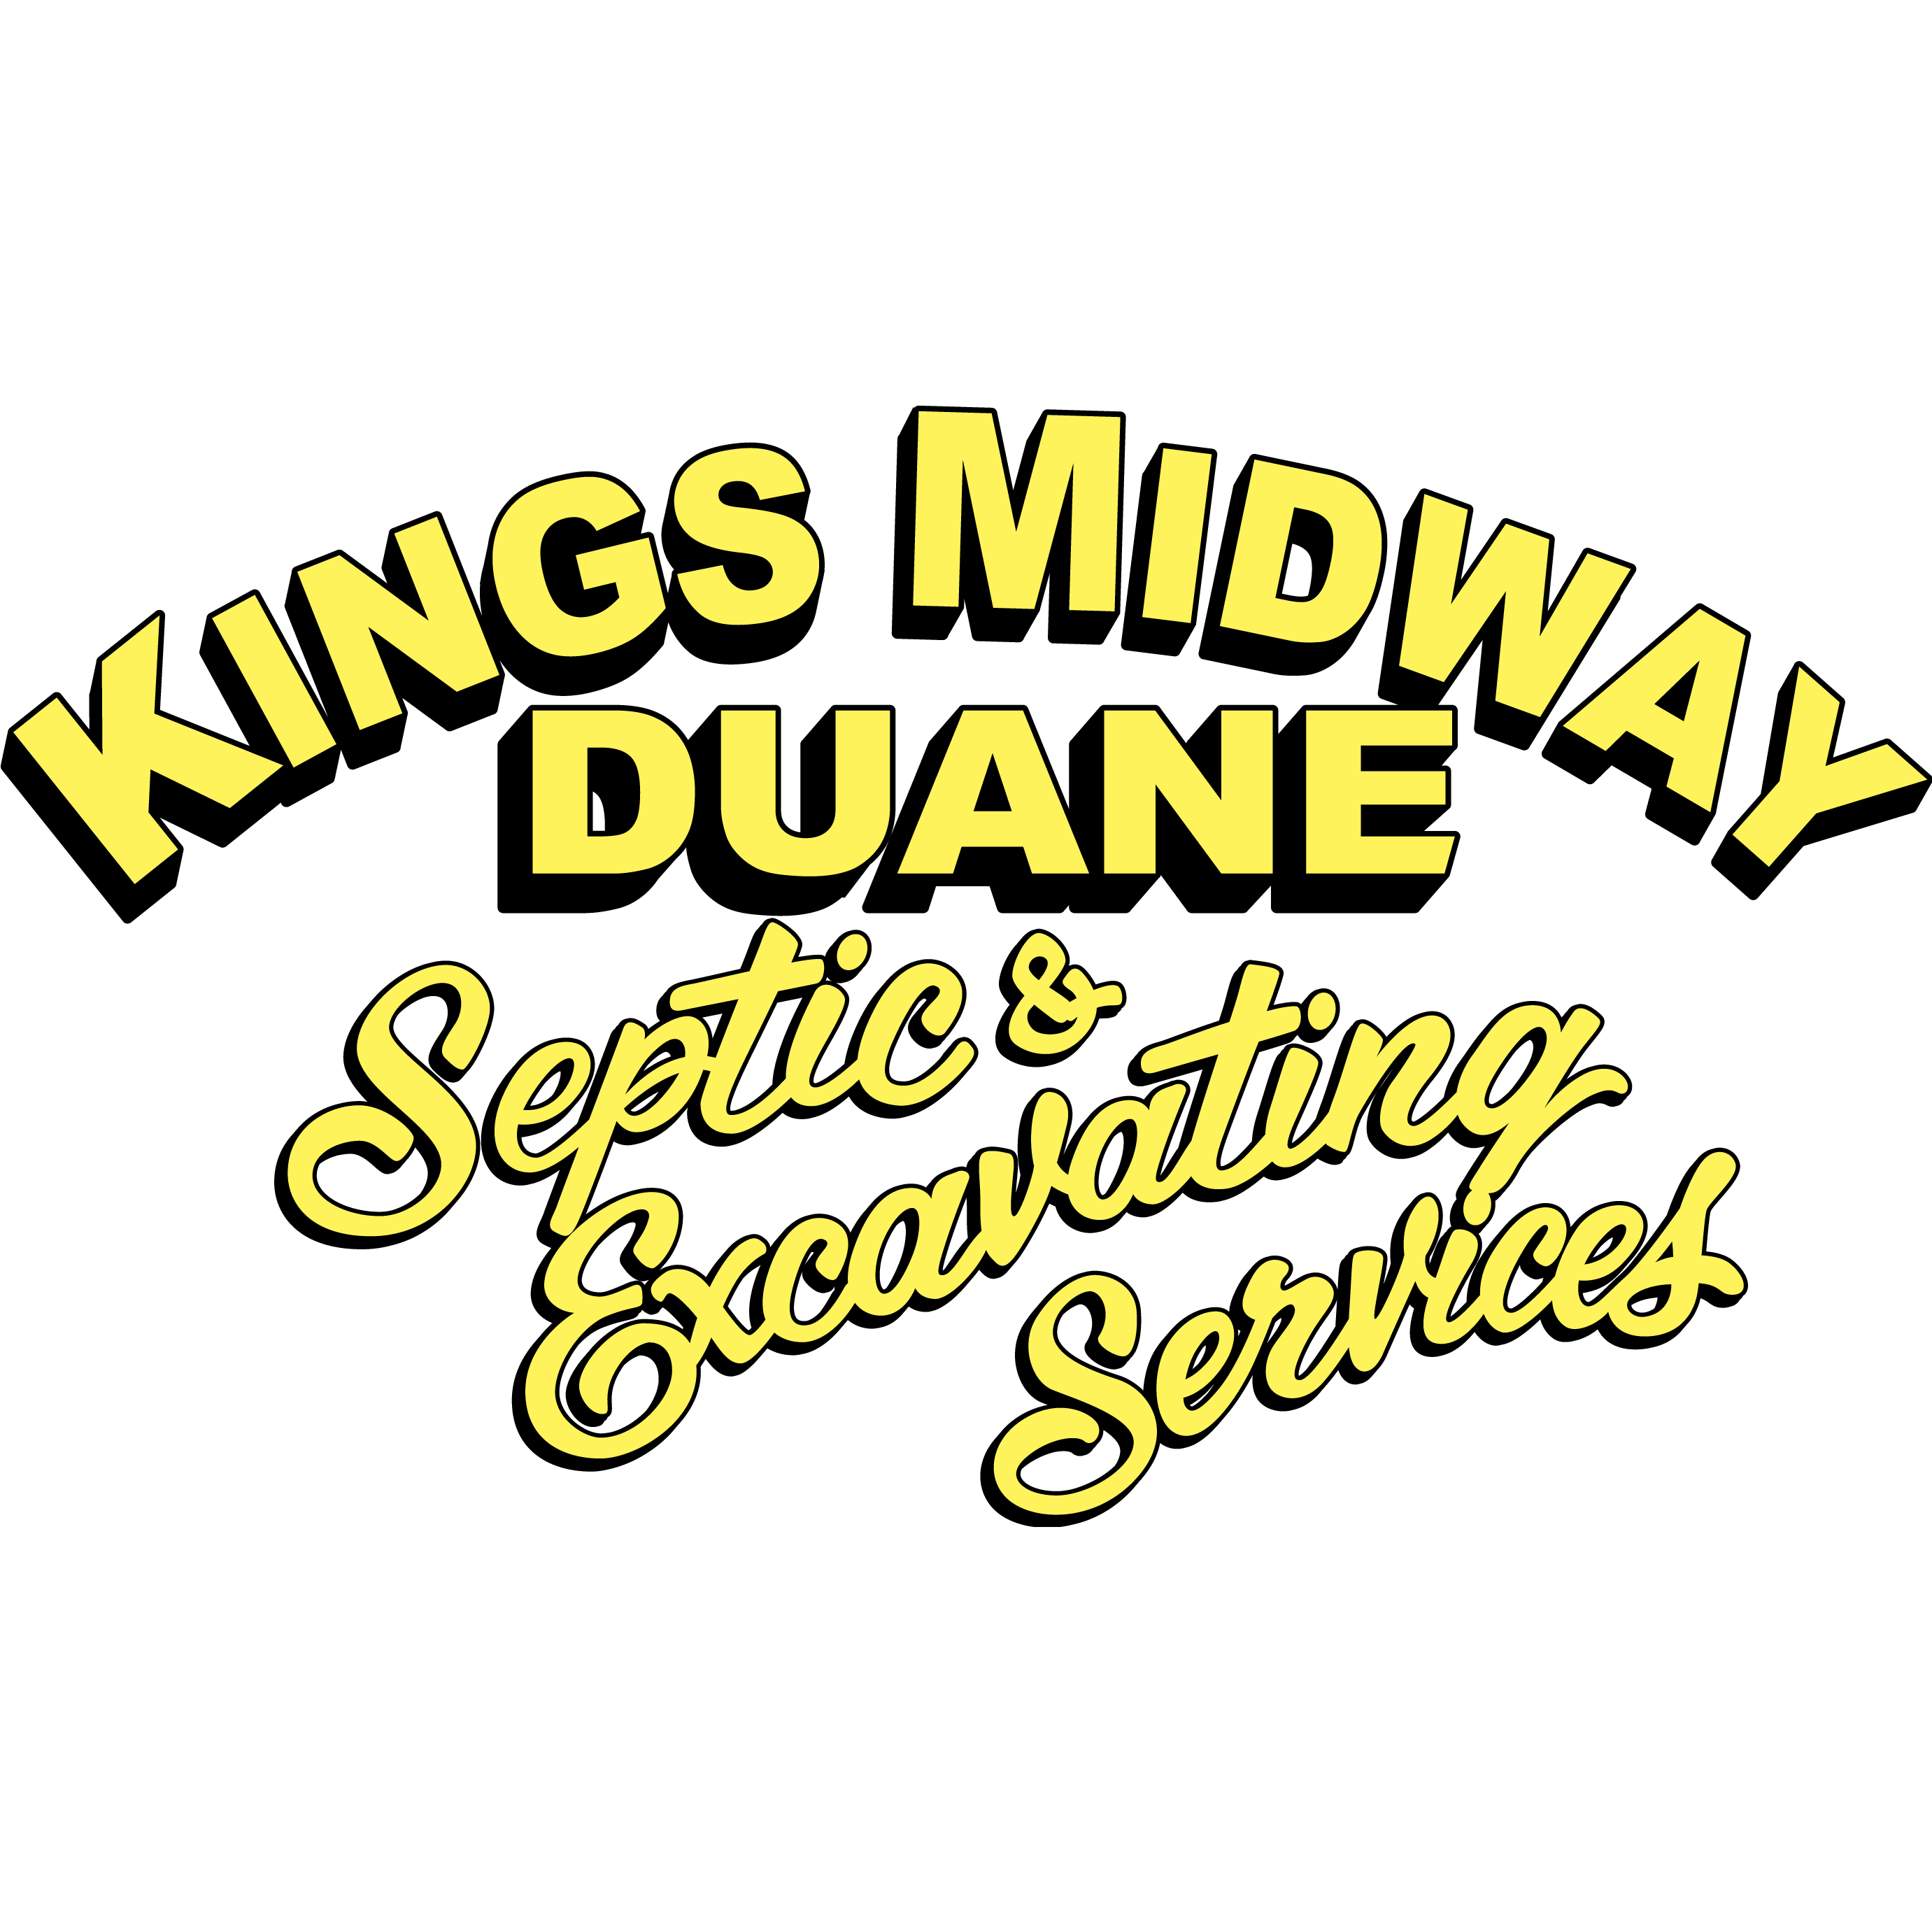 King's Midway Septic Tank Service